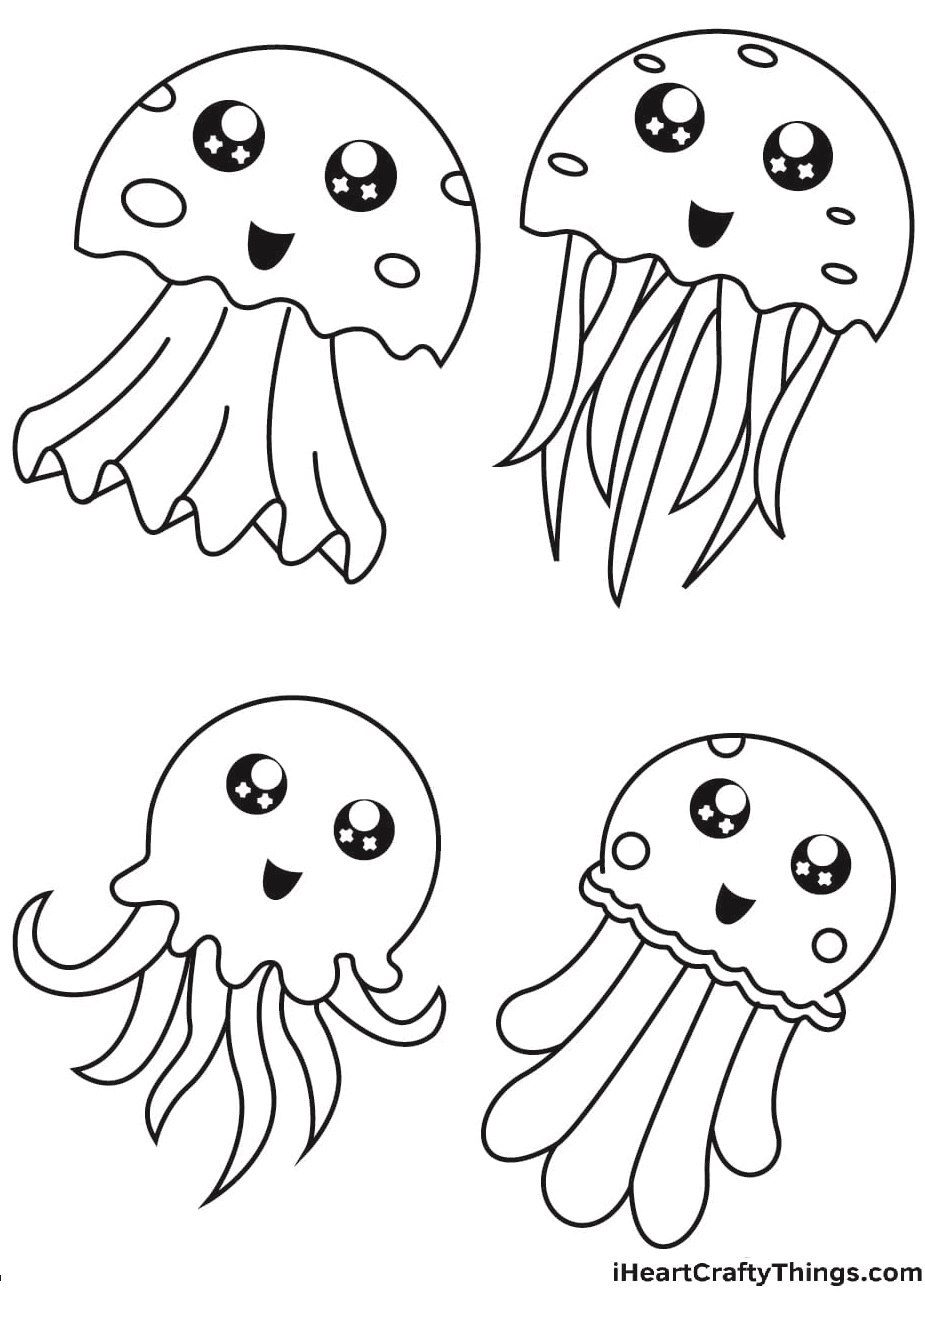 Four Box Jellyfish For Kids Coloring Page